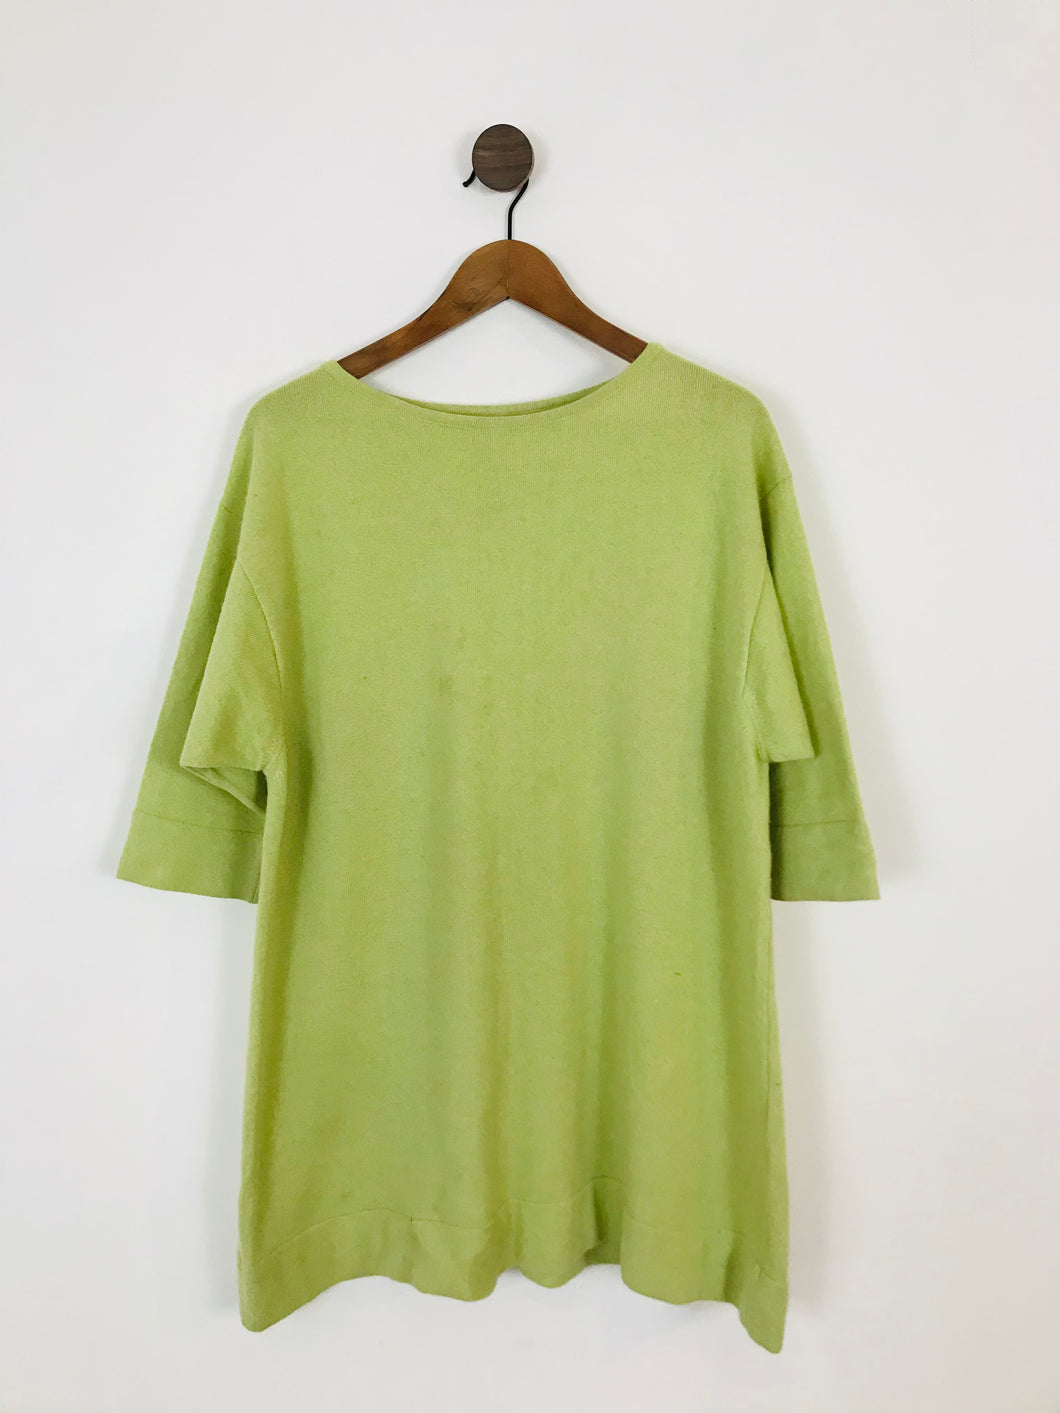 N.Peal Women’s 100% Cashmere Short Sleeve Knit Top | L UK14 | Green